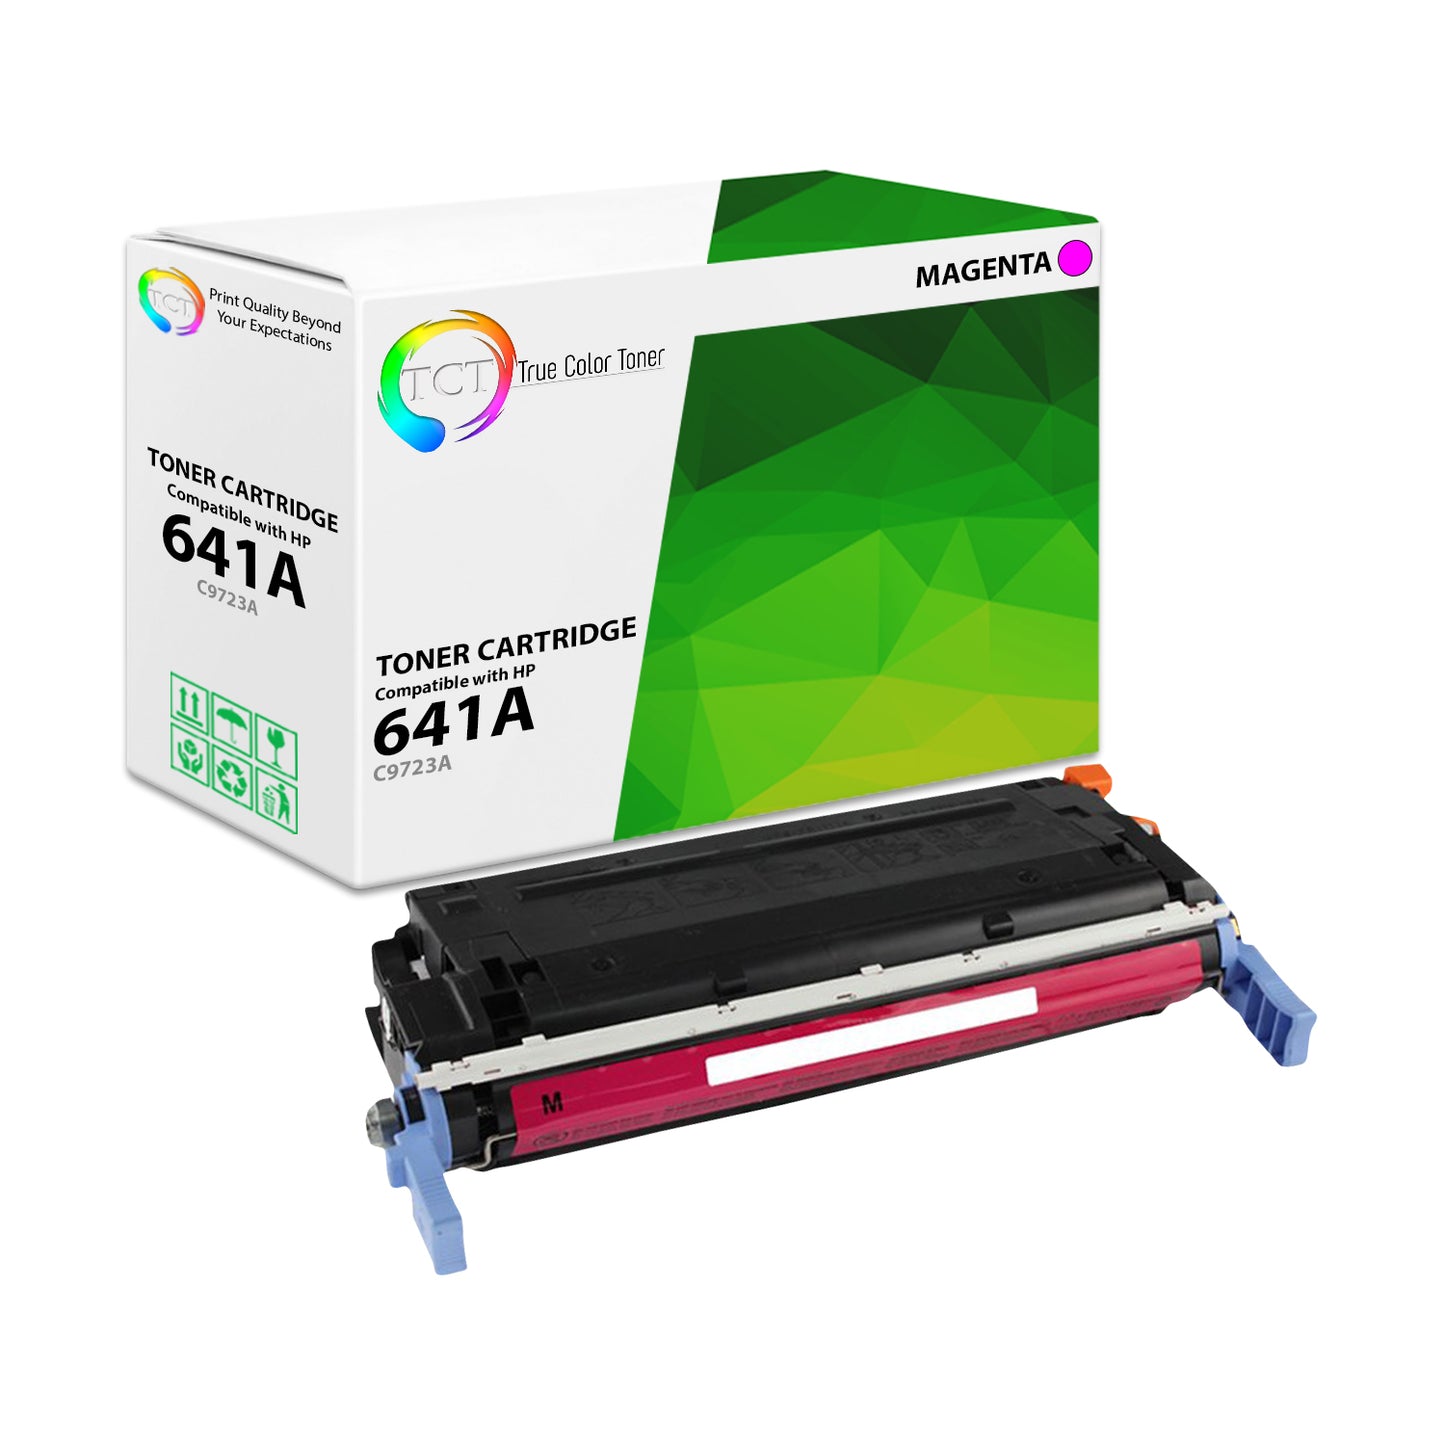 TCT Compatible Toner Cartridge Replacement for the HP 641A Series - 1 Pack Magenta